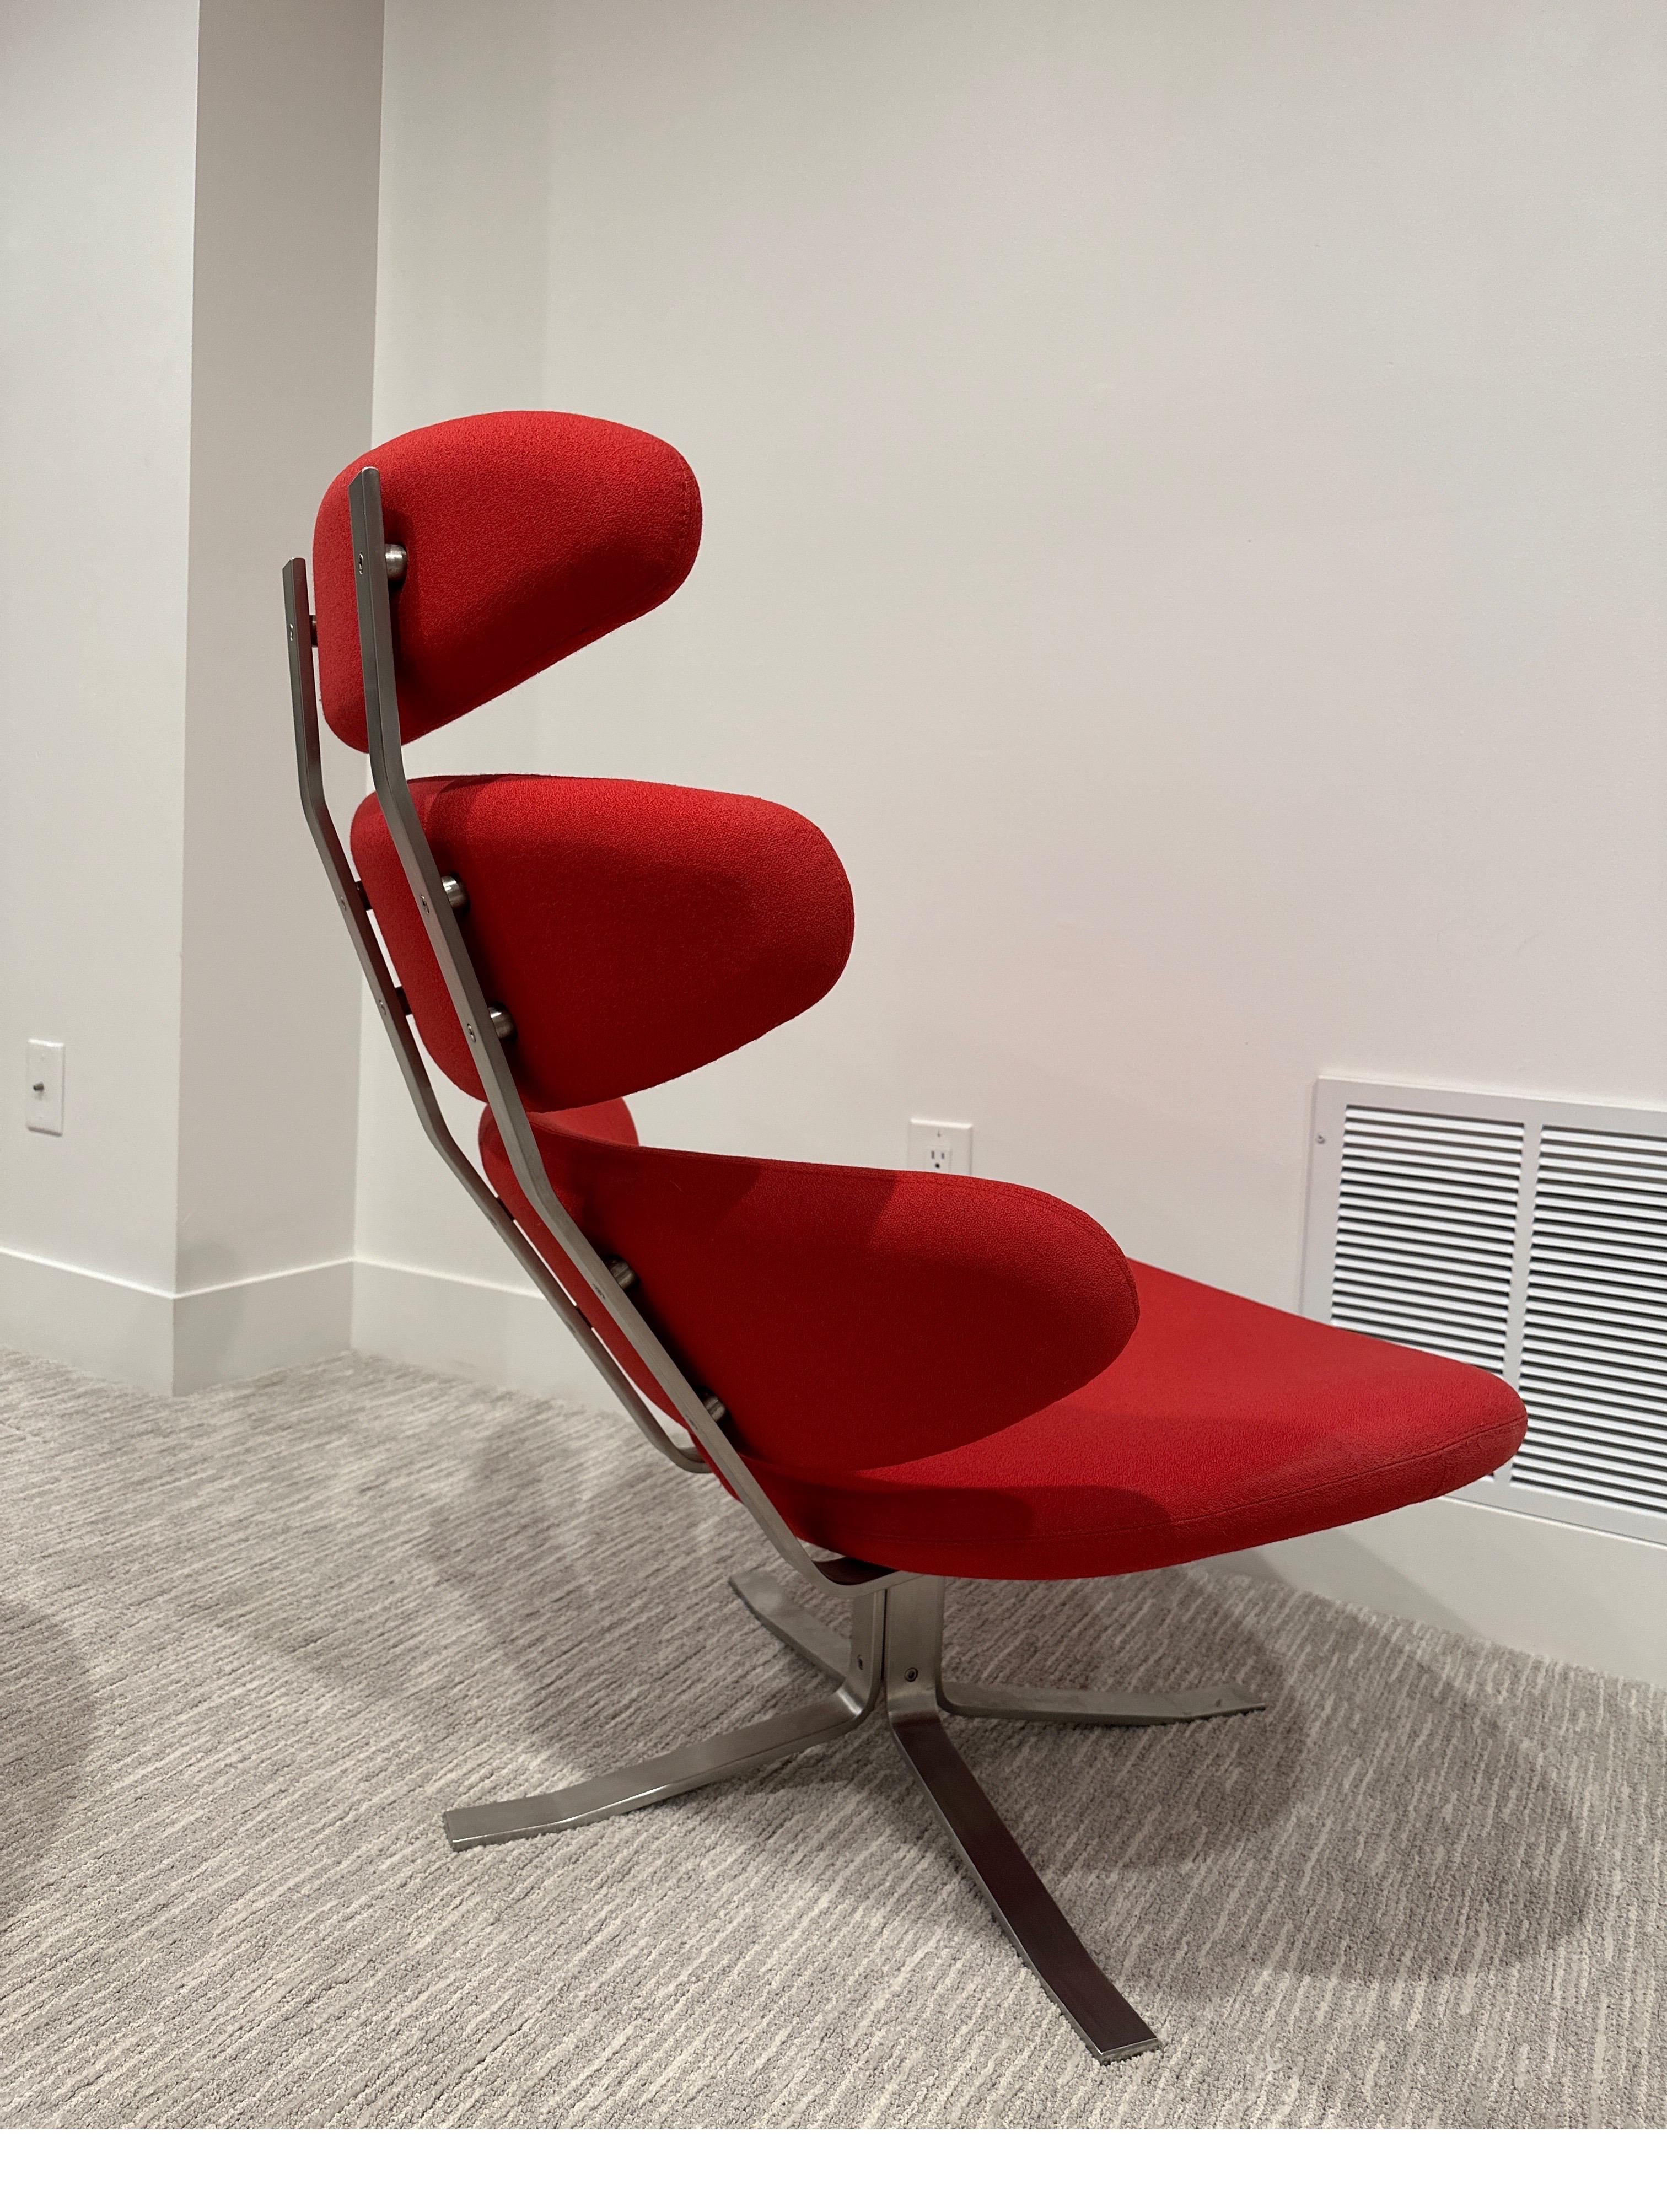 Poul Volther Corona Red Lounge Swivel Chrome Chair and Ottoman Erik Jorgensen In Good Condition For Sale In Philadelphia, PA